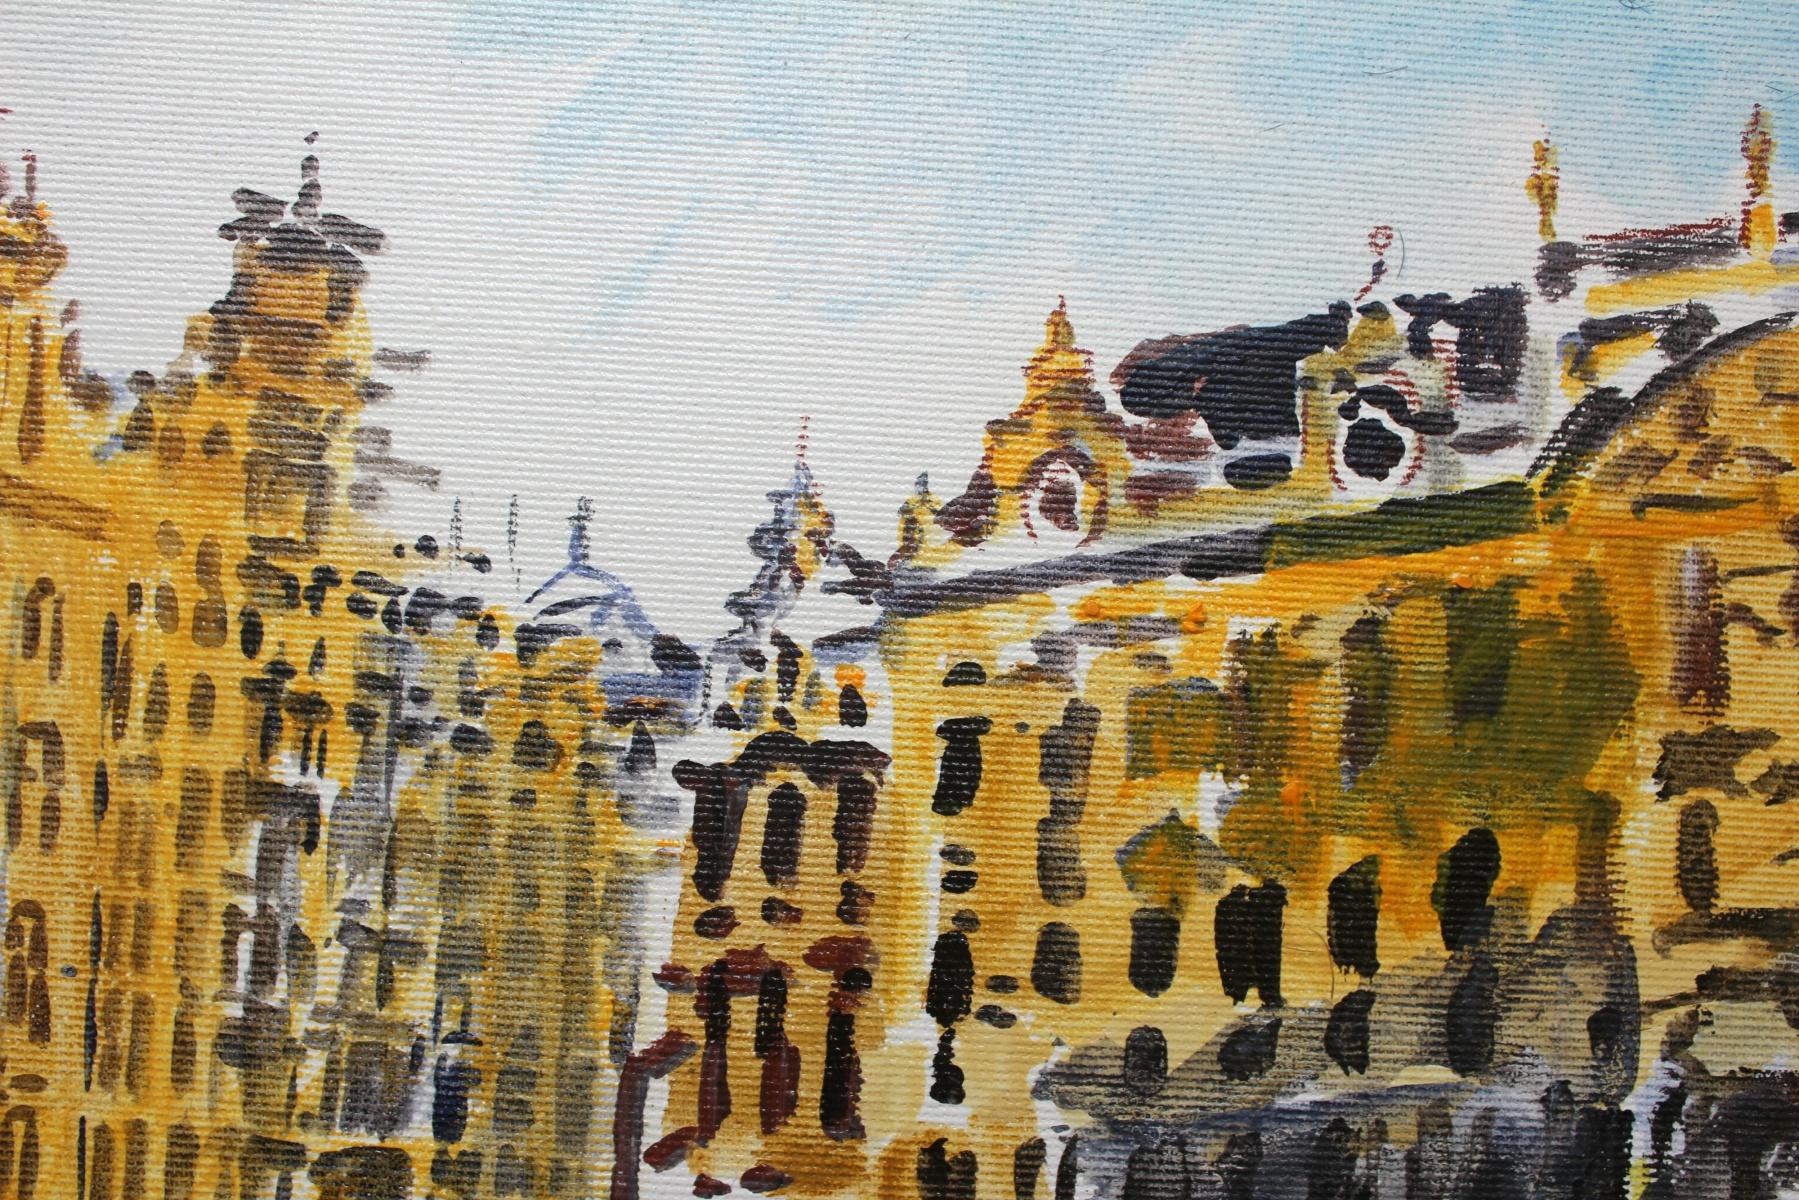 Brussels the Palace of Dukes of Brabant - 21 century Watercolor painting - Gray Landscape Art by Włodzimierz Karczmarzyk